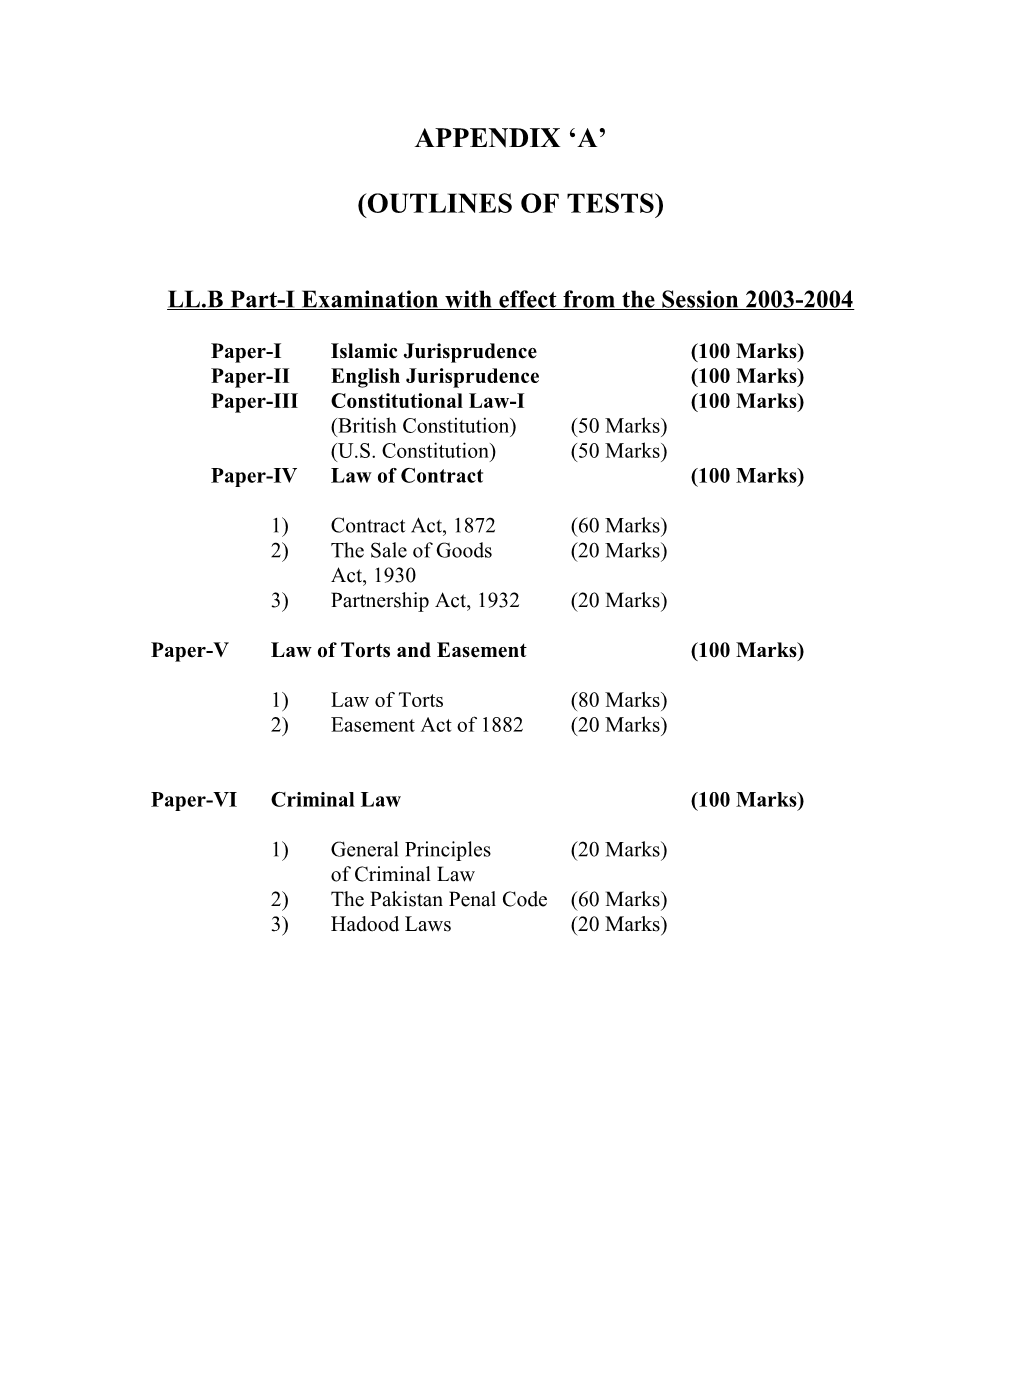 Revised Syllabus for LL